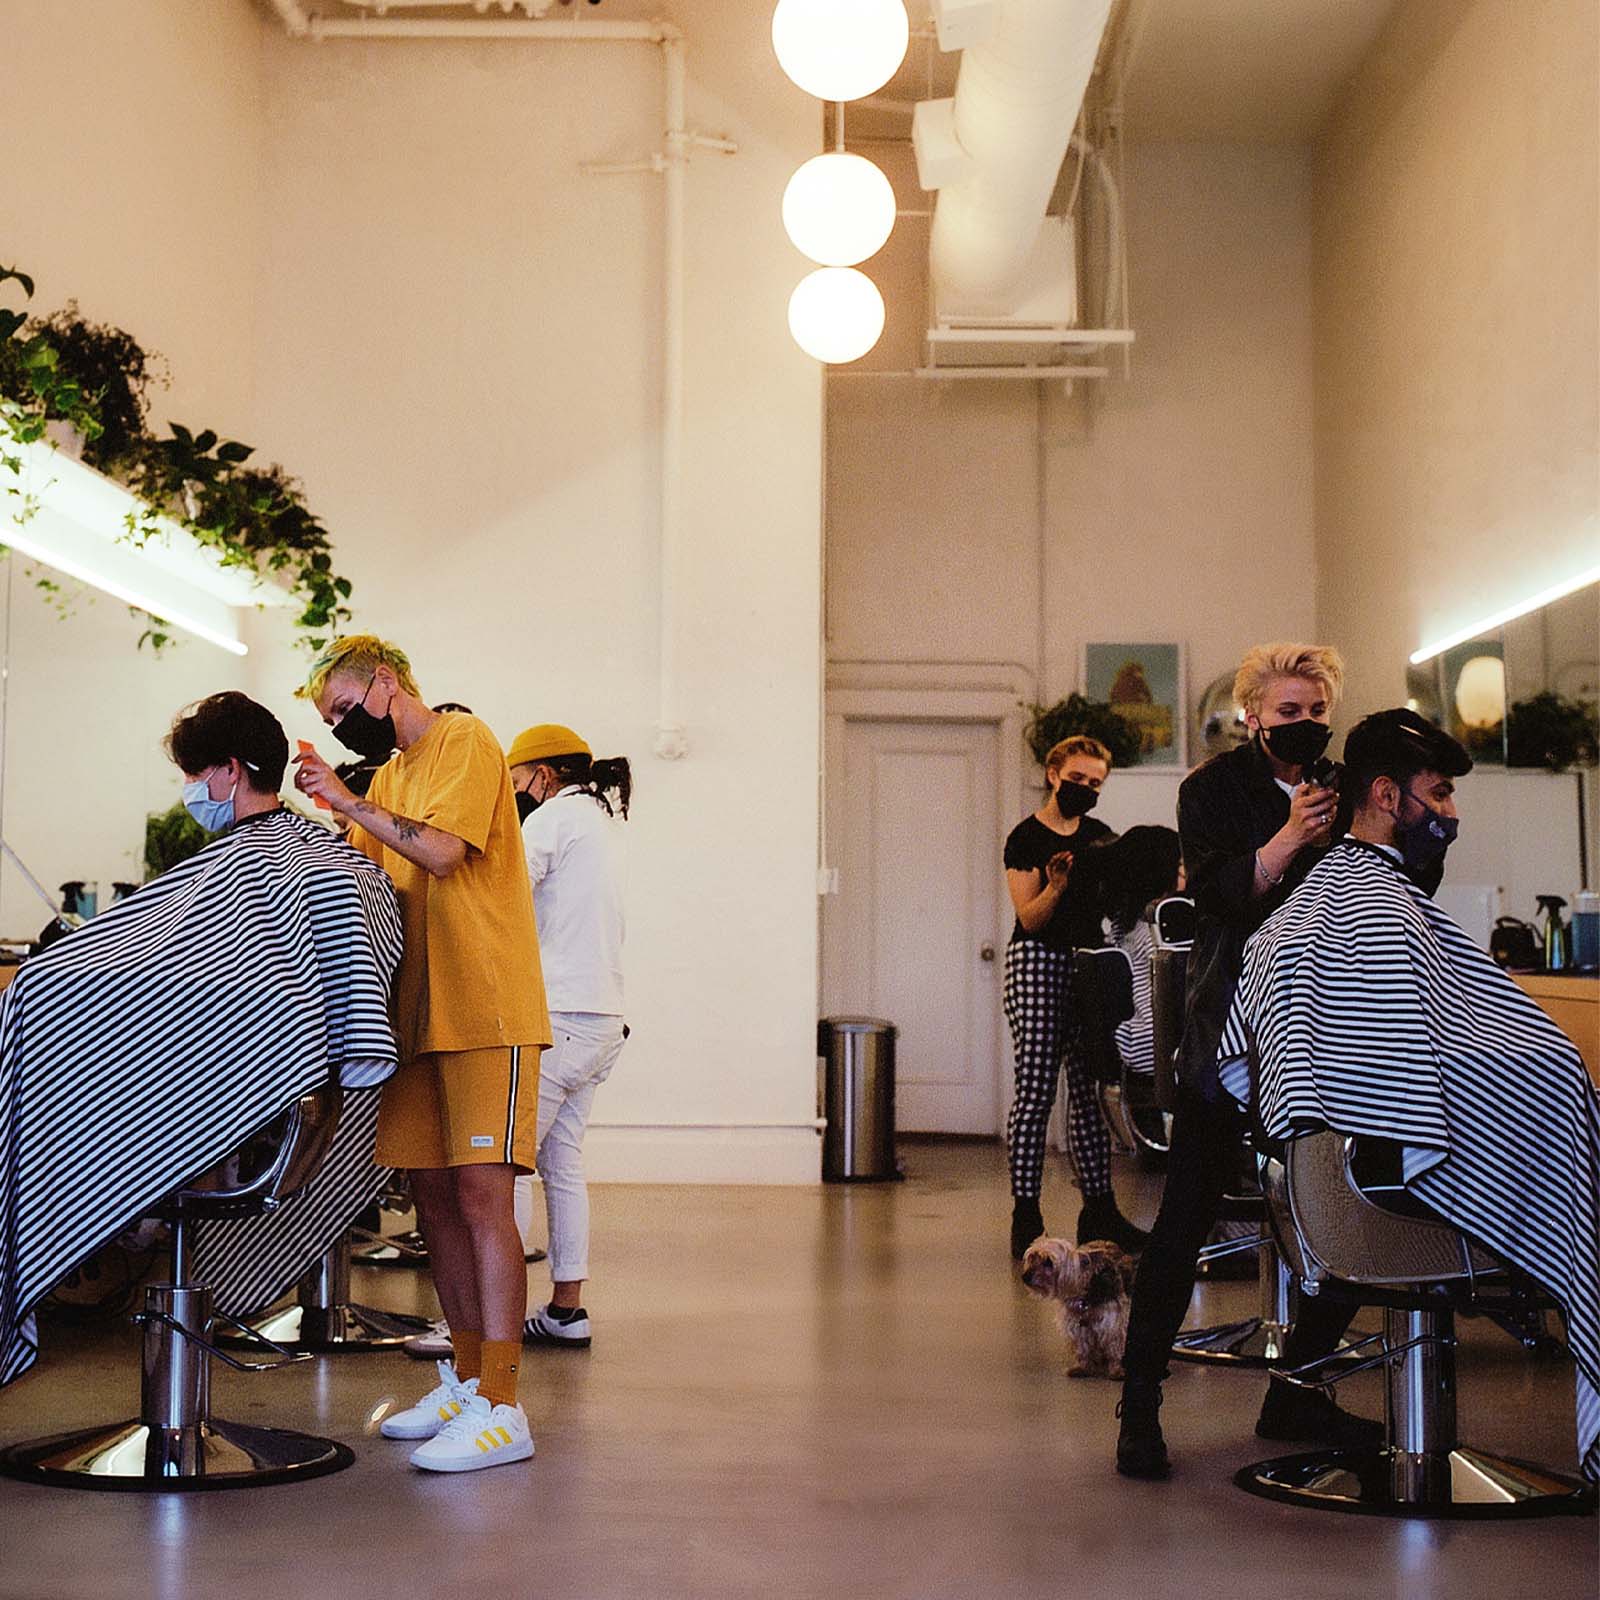 Hairrari: restyling the barbering industry